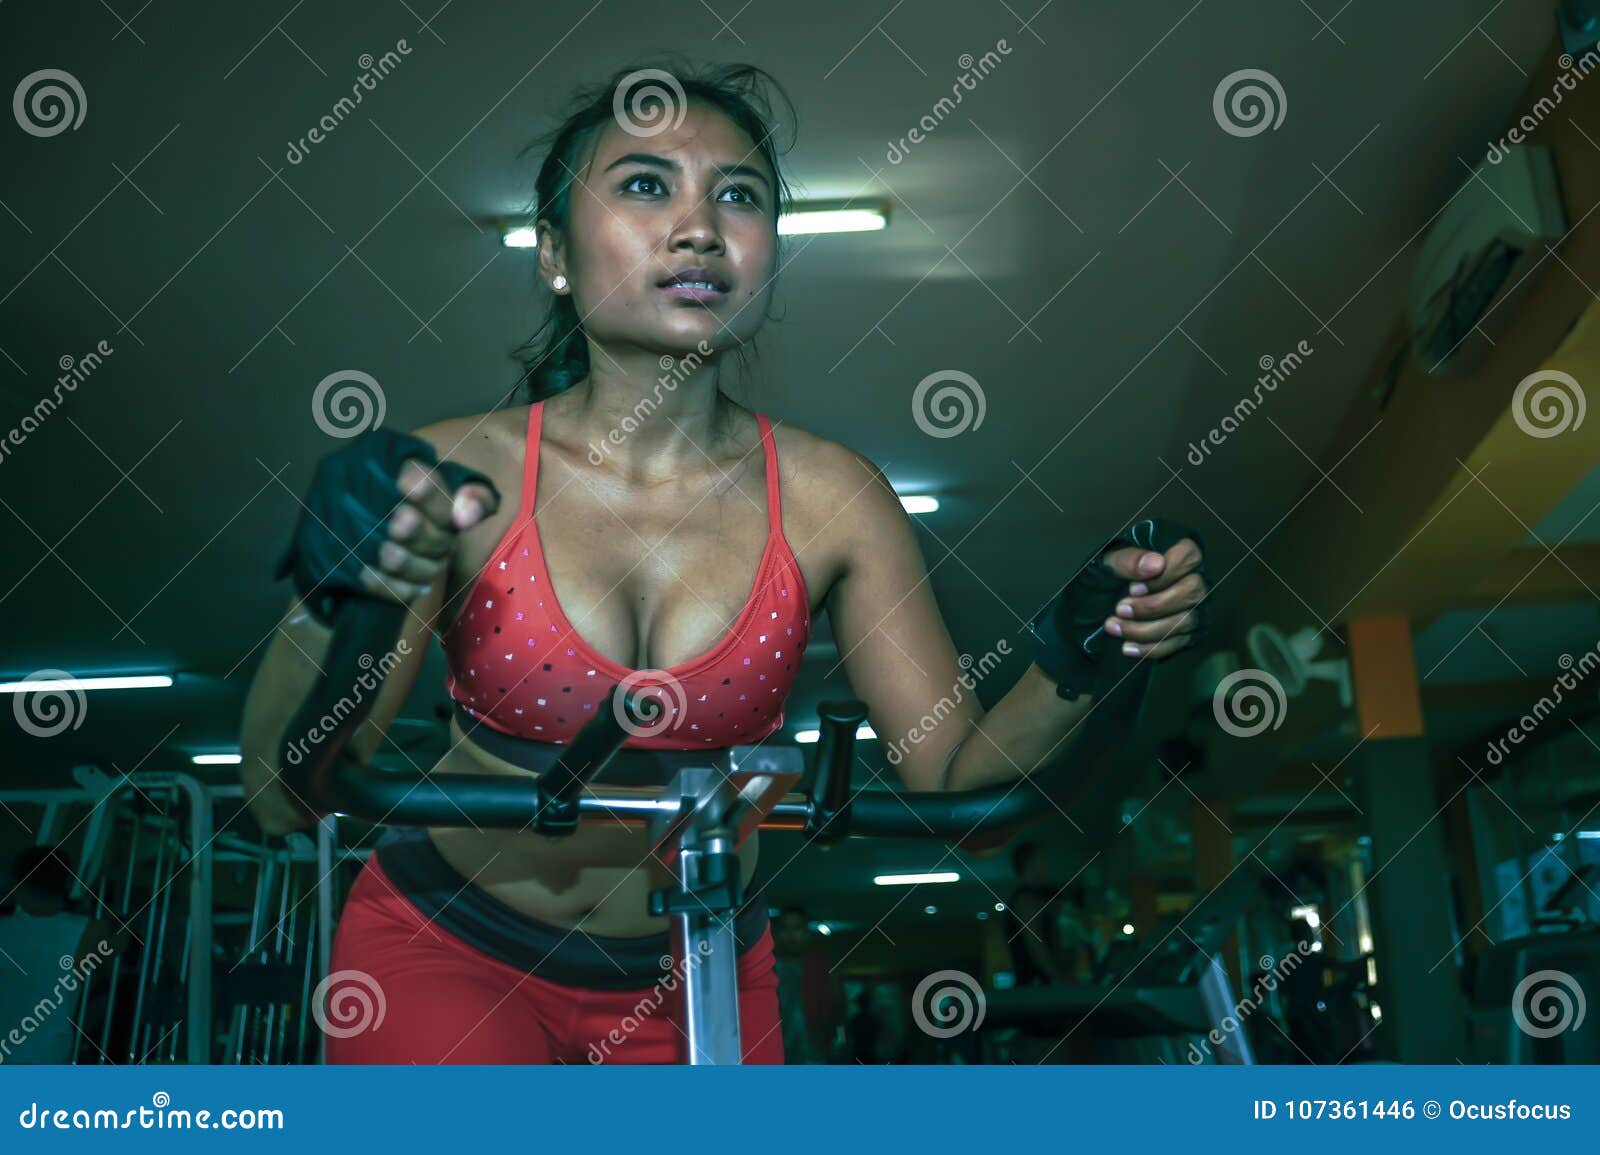 young and sweaty asian woman training hard at gym using elliptical pedaling machine gear in intense workout exercise